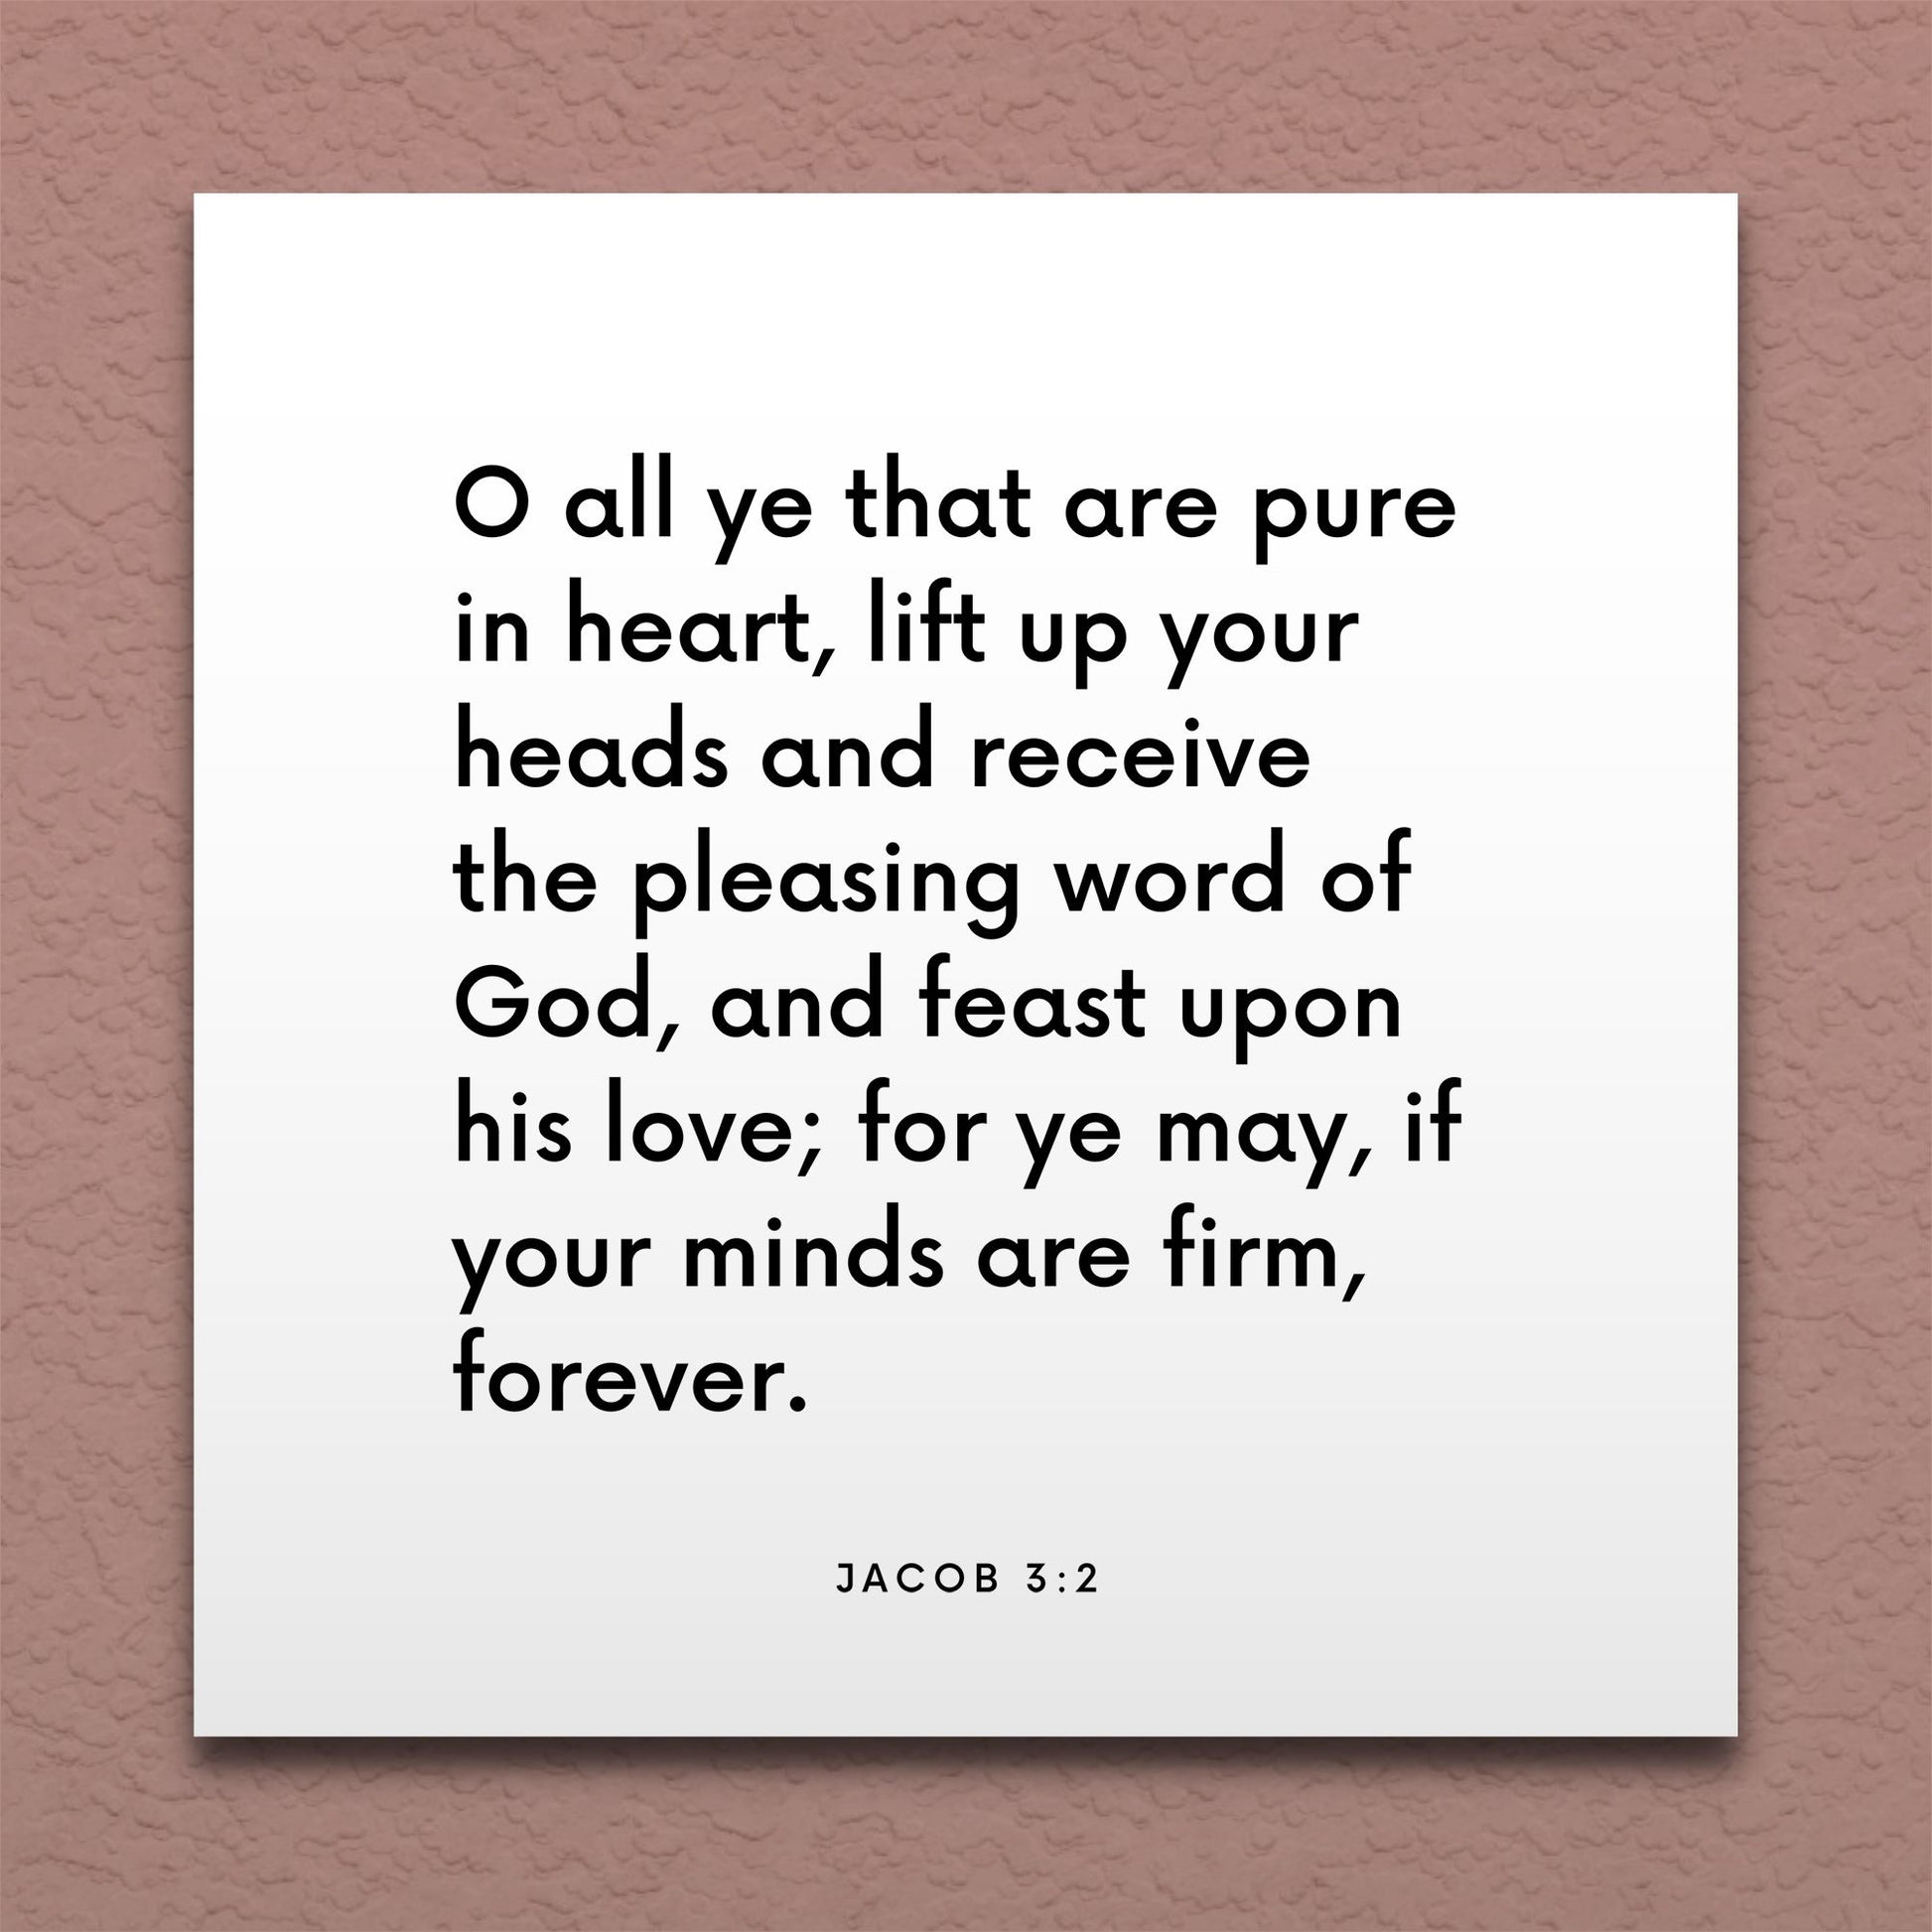 Wall-mounted scripture tile for Jacob 3:2 - "O all ye that are pure in heart, lift up your heads"